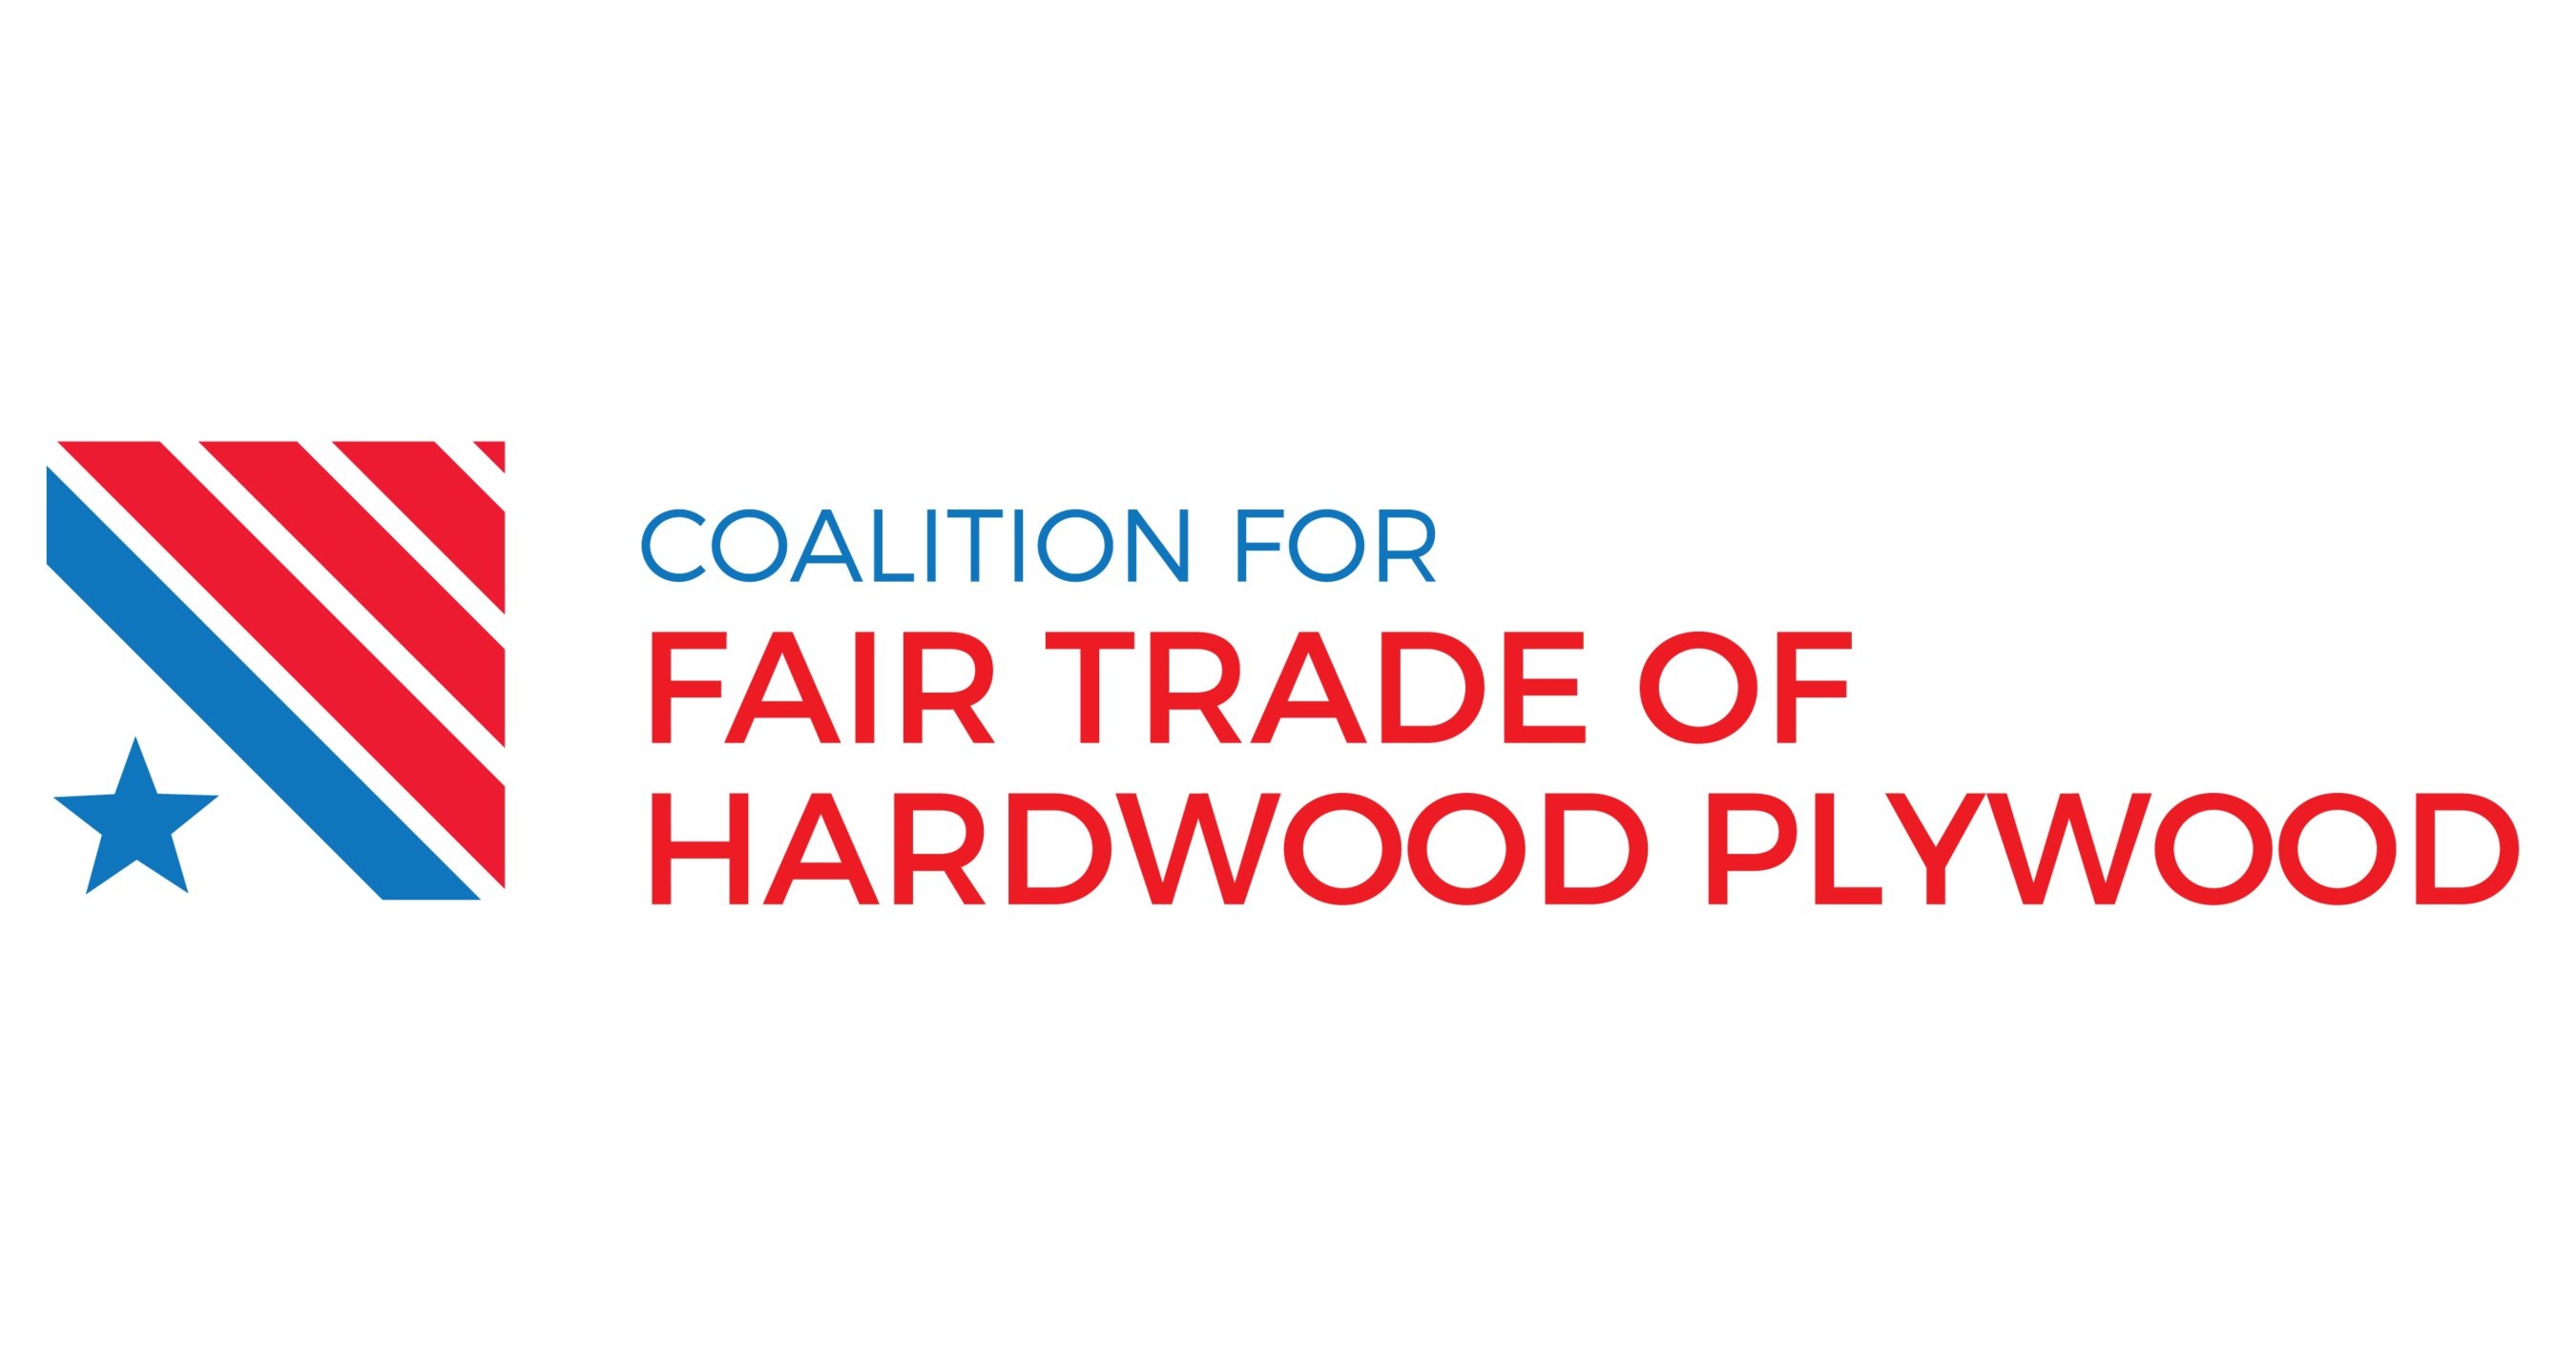 What Is Happening With Hardwood Plywood Products From China Hardwood Distributors Association